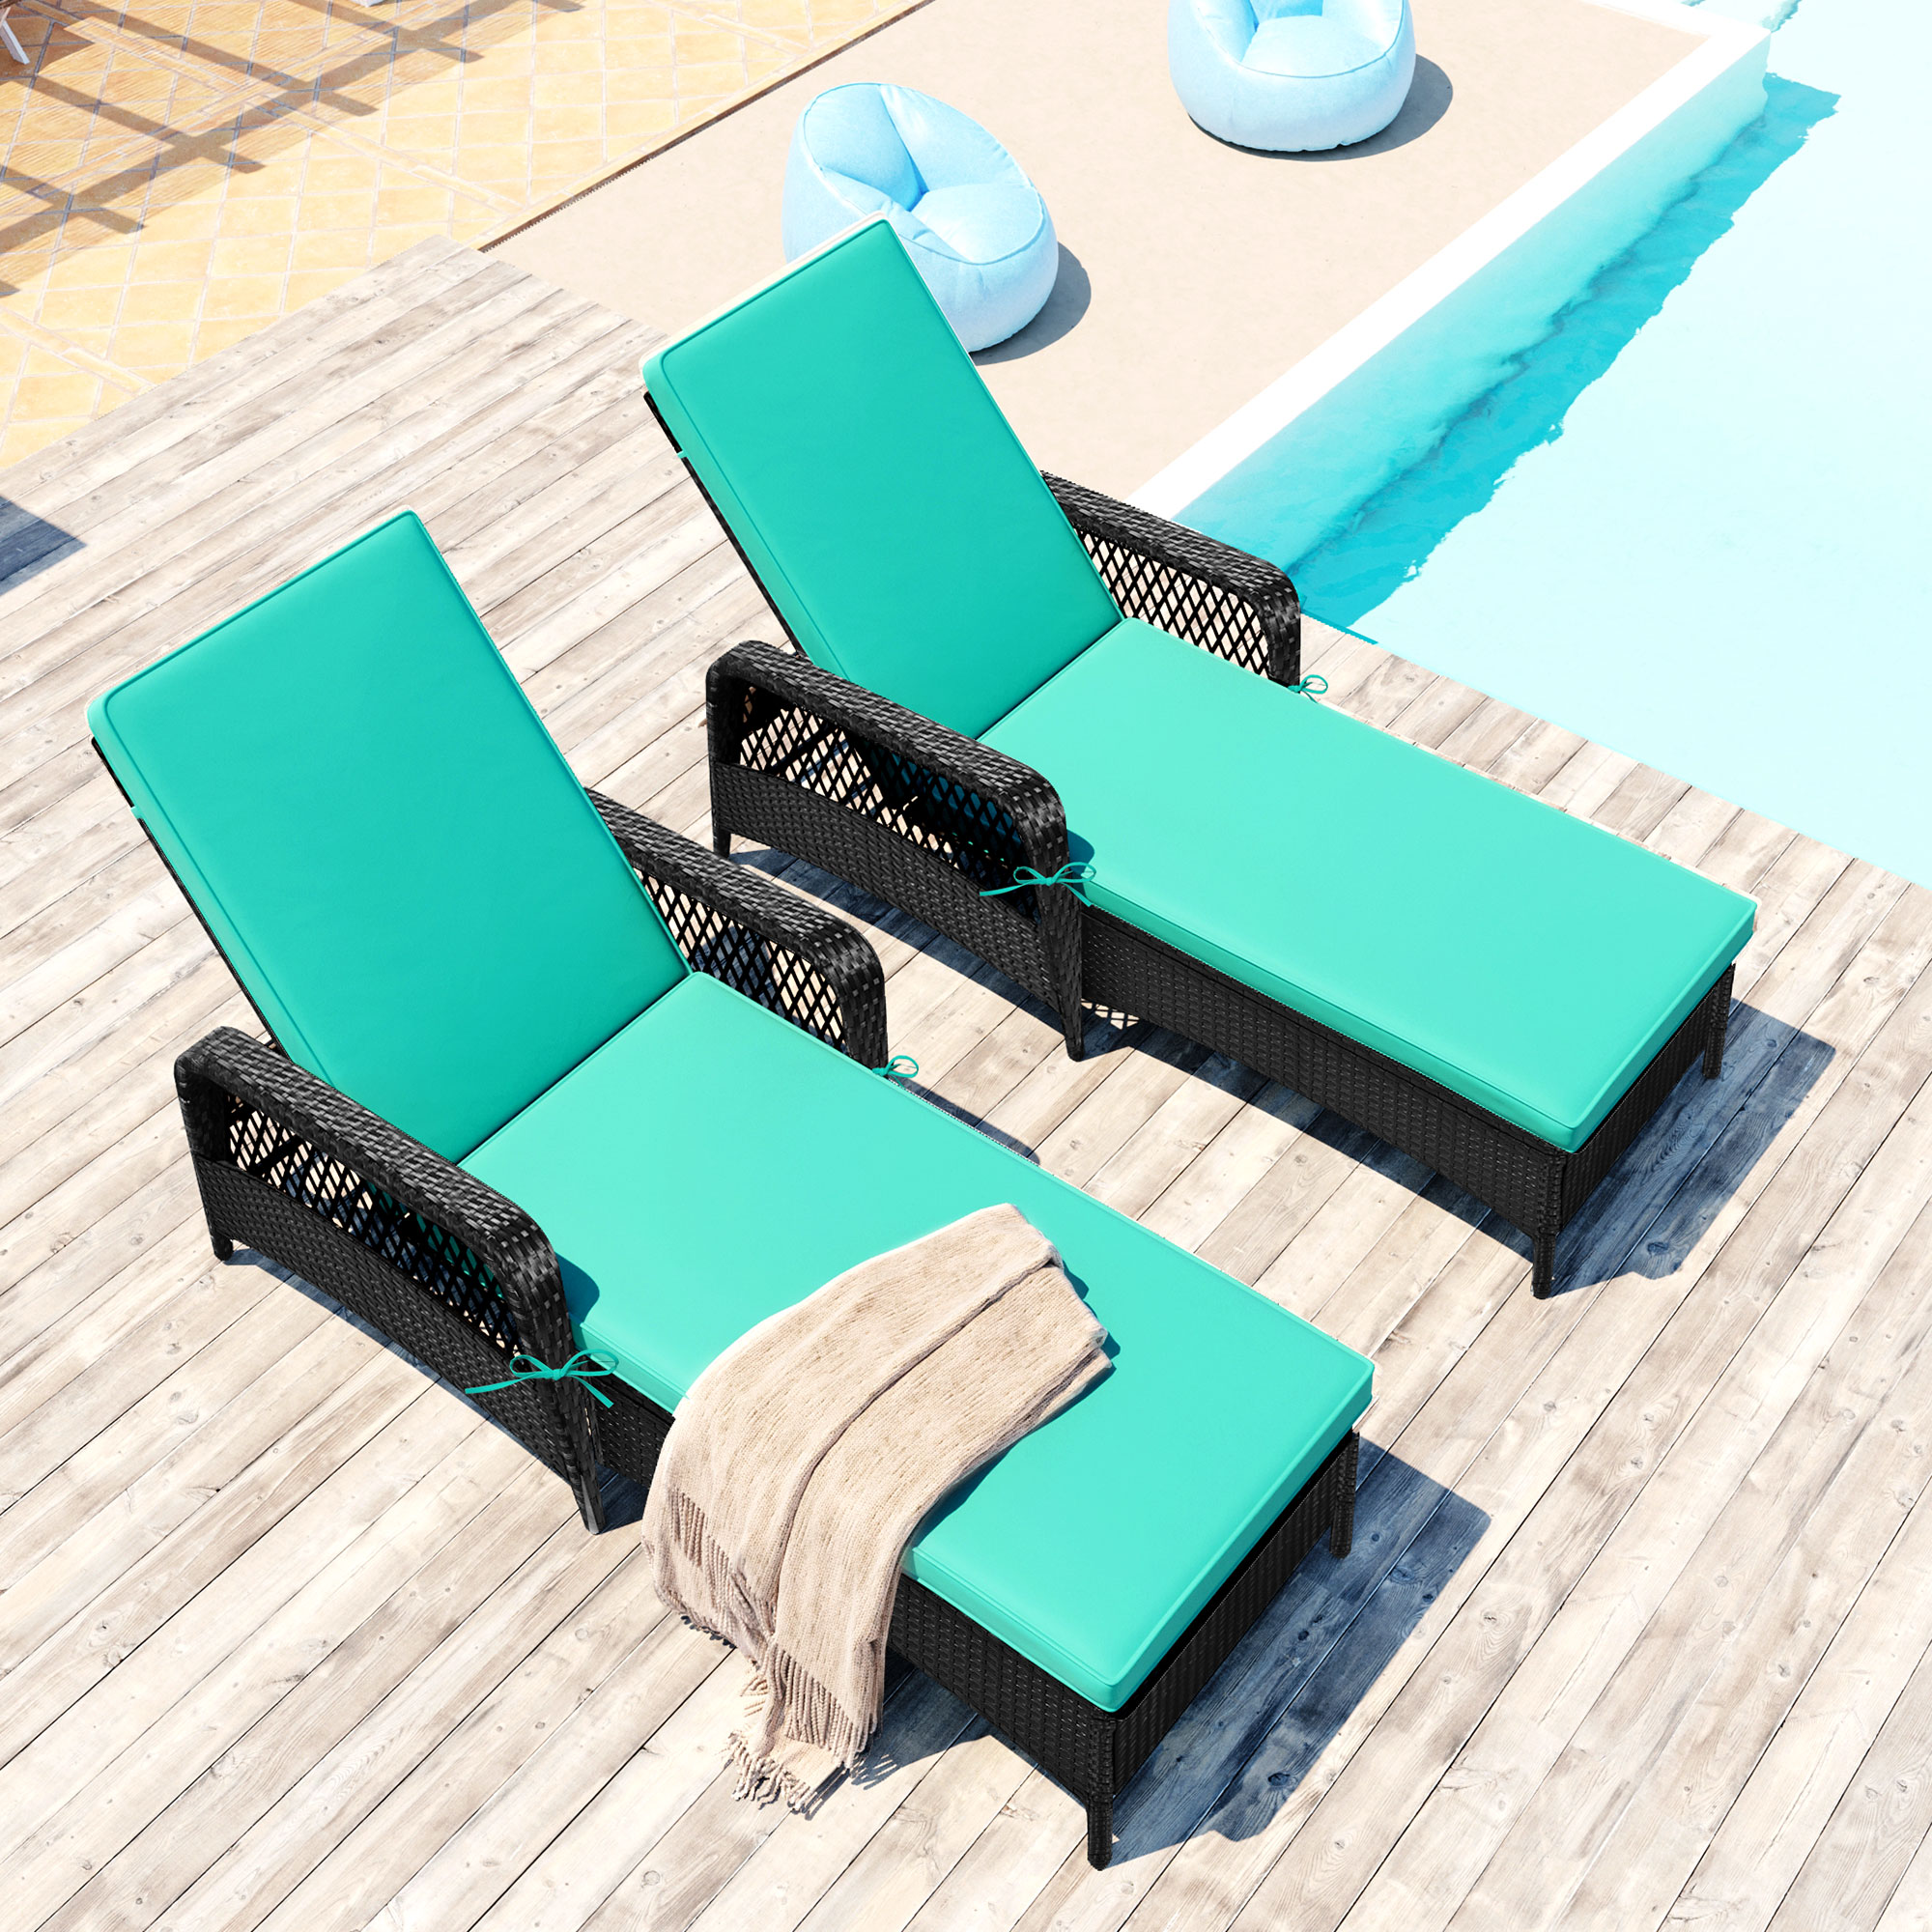 Sesslife Chaise Lounge Chair for Outside, Rattan Wicker Outdoor Lounge Chair, Adjustable Pool Lounge Chair with Thickened Cushion for Patio Poolside Deck(2 Sets) - image 3 of 10